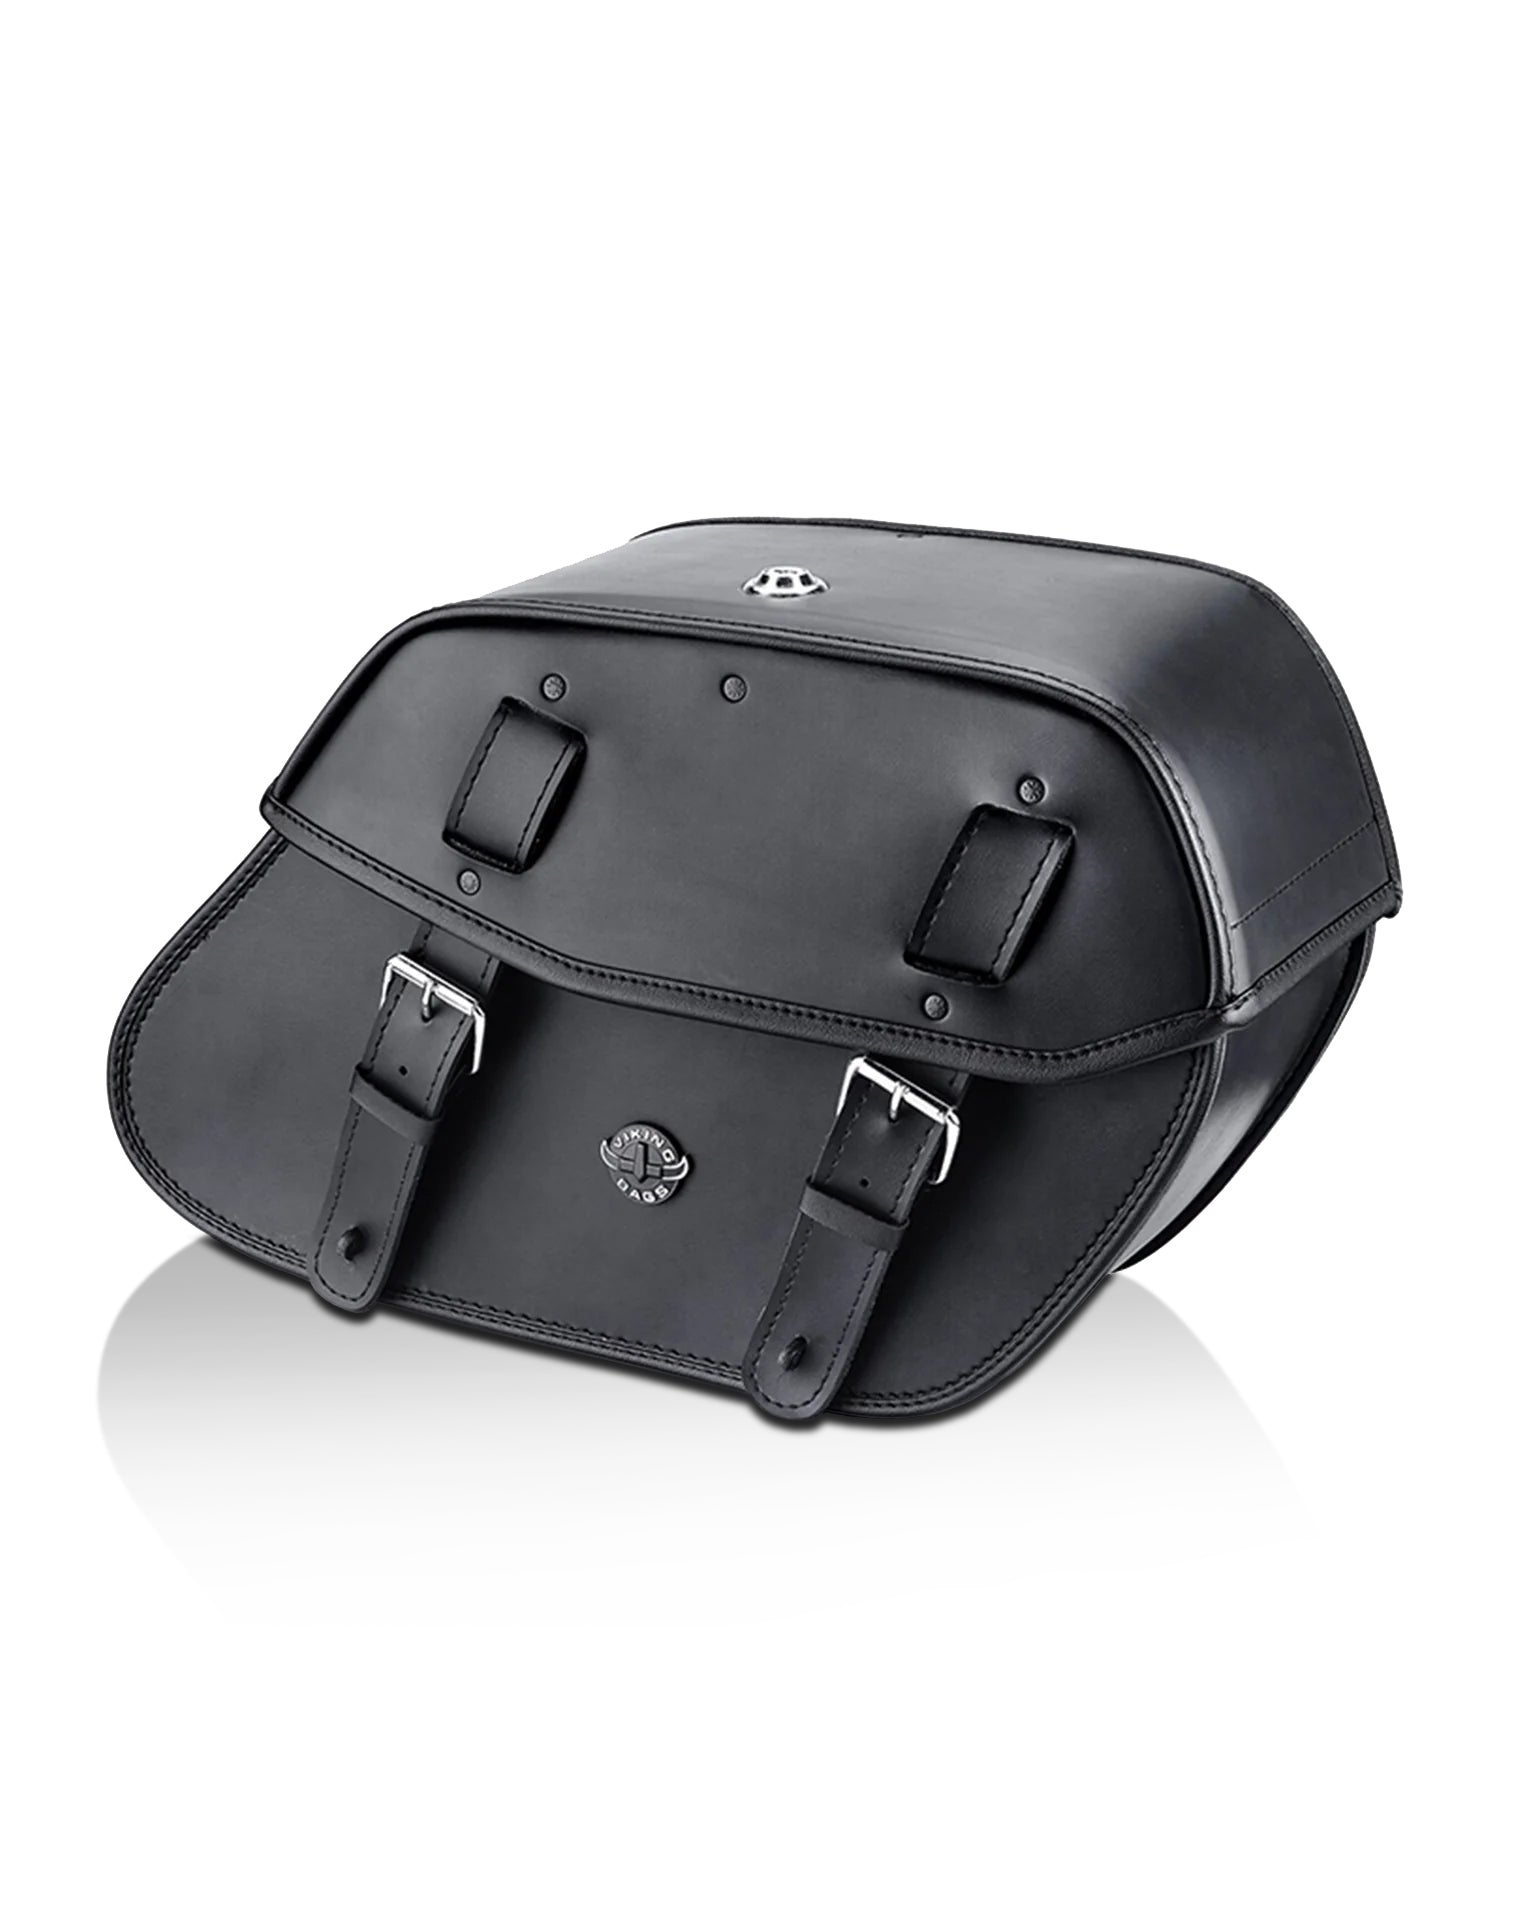 Viking Odin Large Leather Motorcycle Saddlebags For Harley Softail Springer Fxsts I Main View